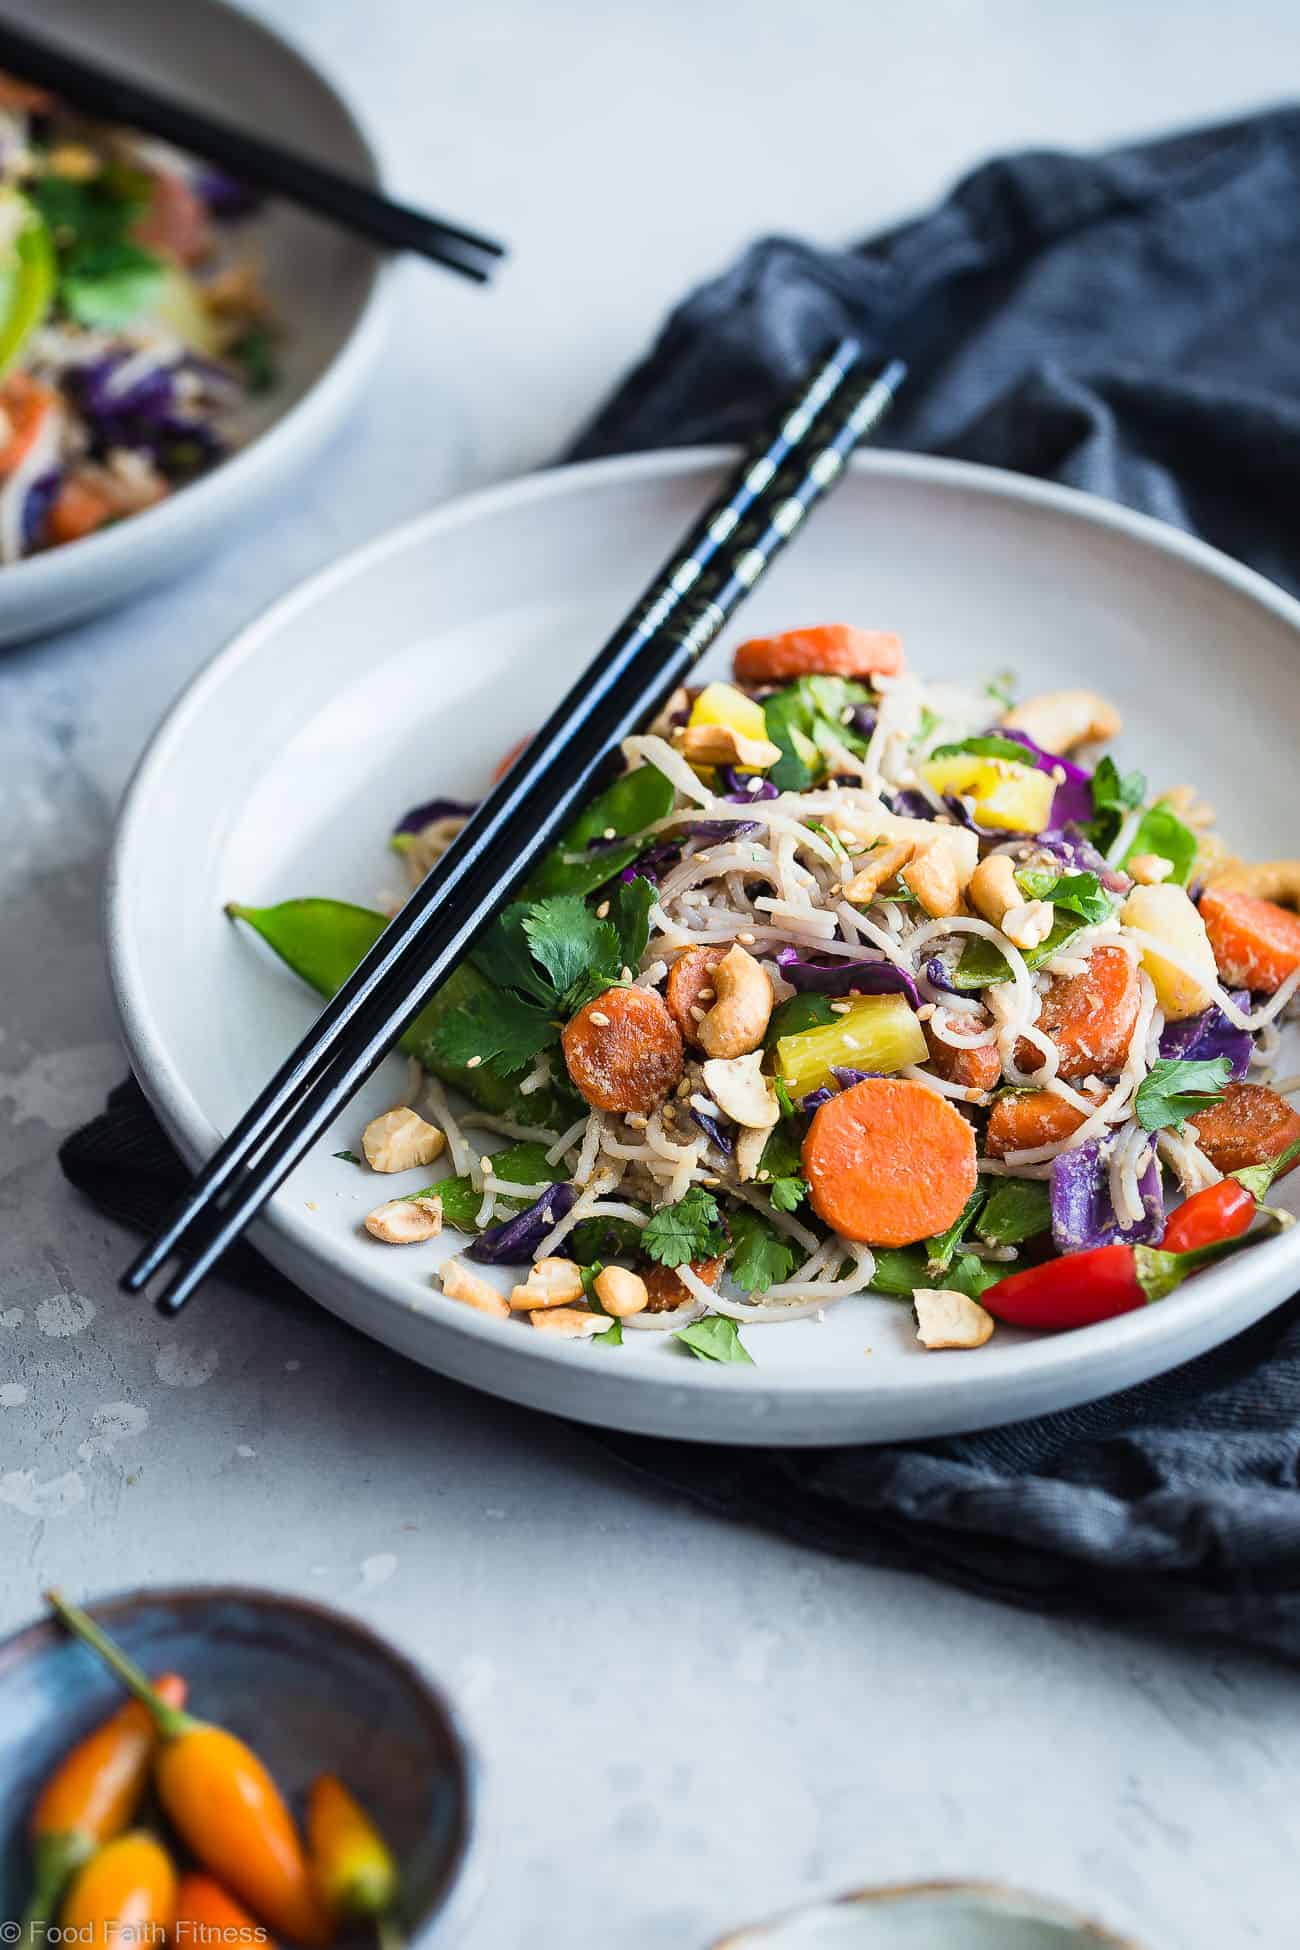 Vegan "Honey" Ginger Stir Fry with Cashew Cream  -  This Easy Healthy Vegetarian Stir Fry is a simple and quick vegan friendly dinner that is LOADED with vegetables and flavor! Even picky eaters will love this simple, dairy and gluten free recipe! | #Foodfaithfitness.com | #vegan #vegetarian #stirfry #glutenfree #healthy